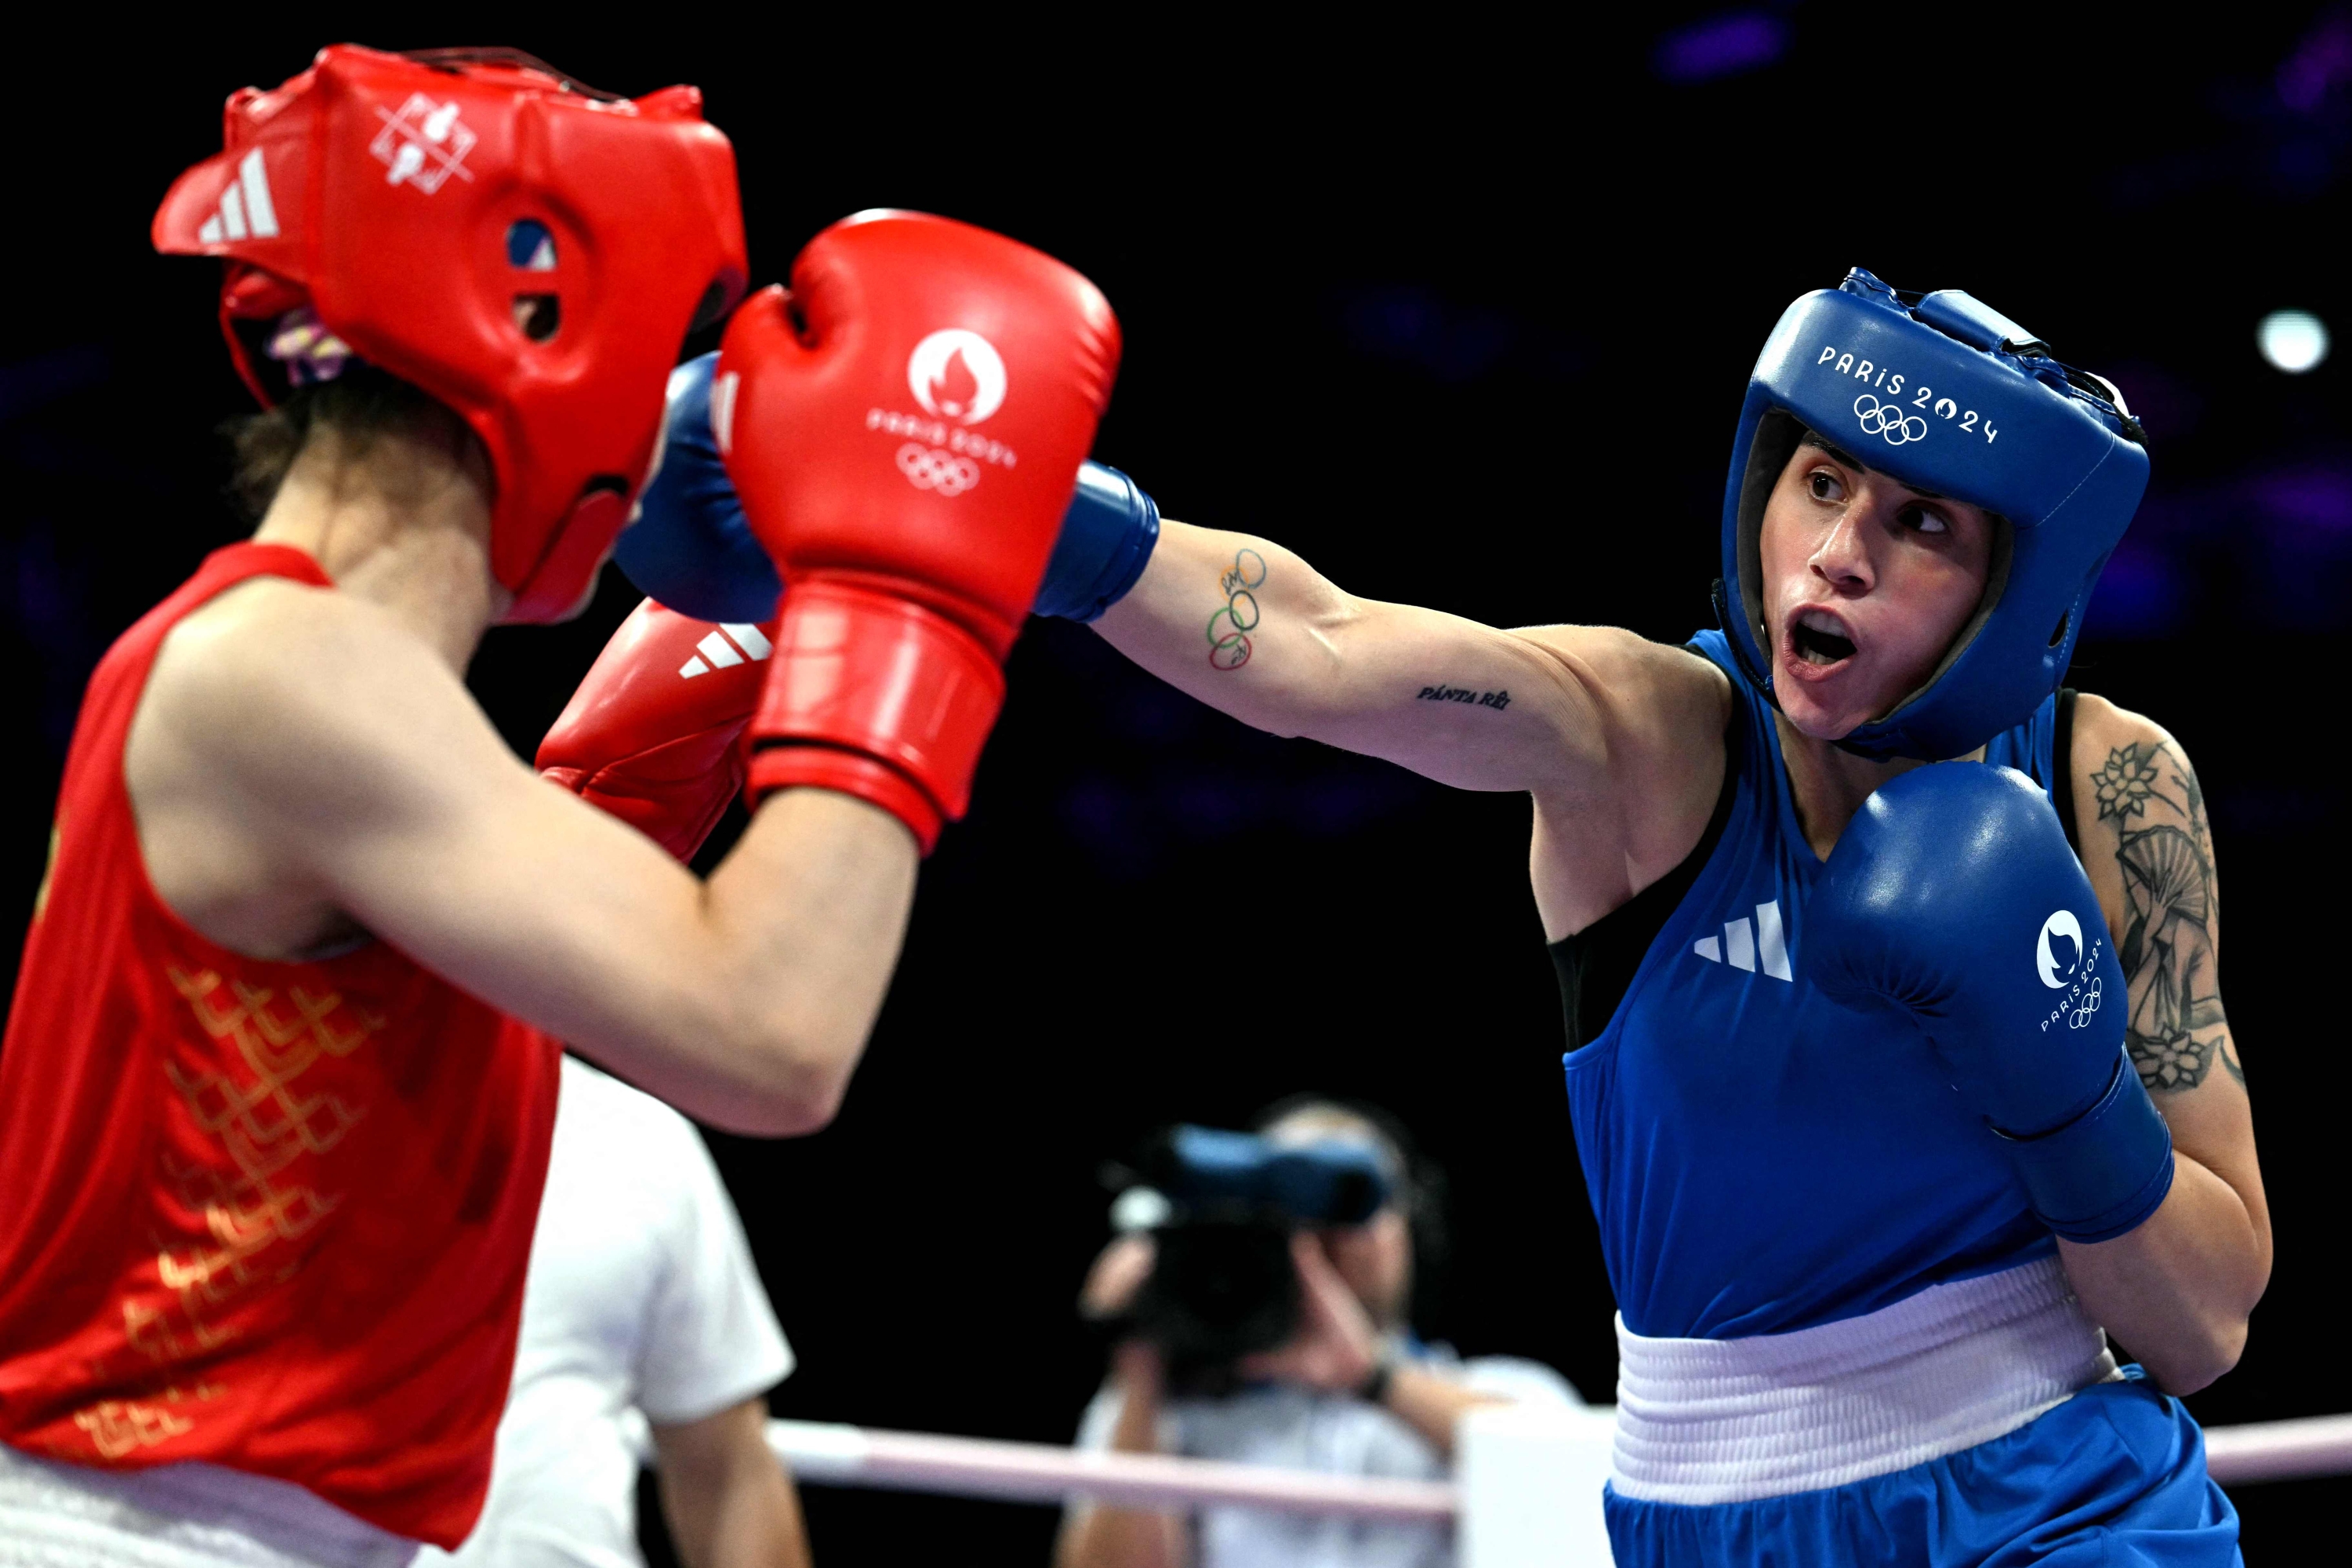 Italy's Irma Testa (in blue) punches China's Zichun Xu in the women's 57kg preliminaries round of 32 boxing match during the Paris 2024 Olympic Games at the North Paris Arena, in Villepinte on July 30, 2024. (Photo by MOHD RASFAN / AFP)